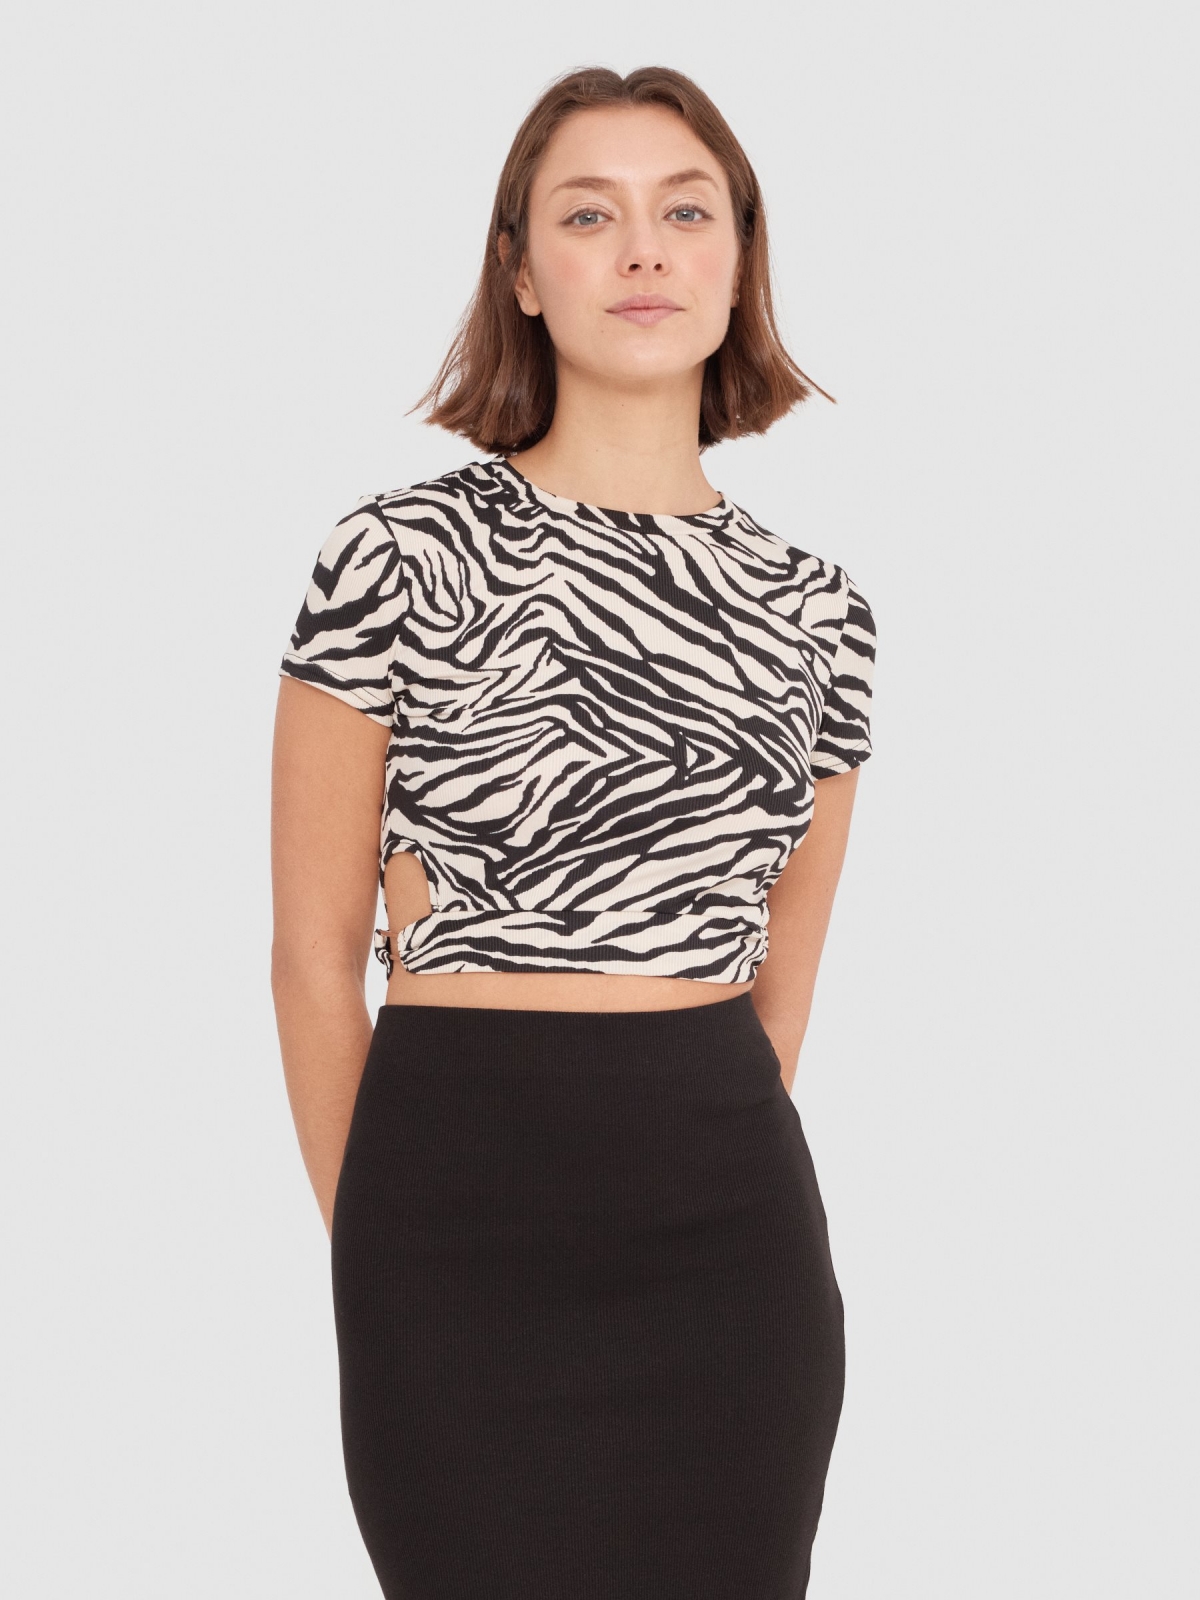 Animal print crop top with cut out beige middle front view